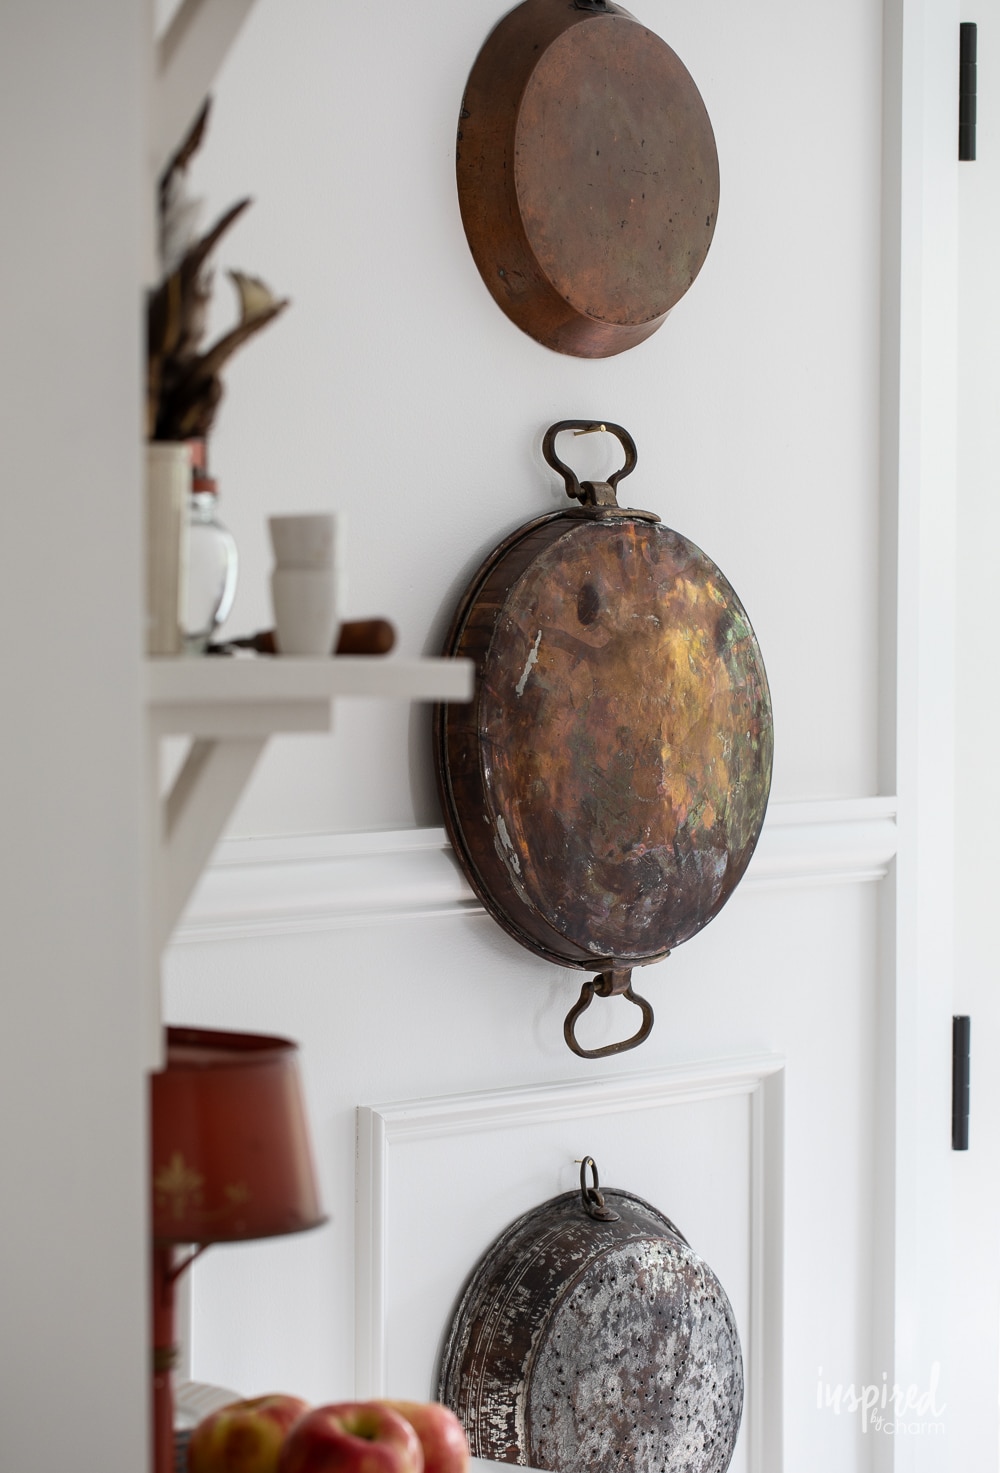 vintage copper pots and pans hung on a wall. 